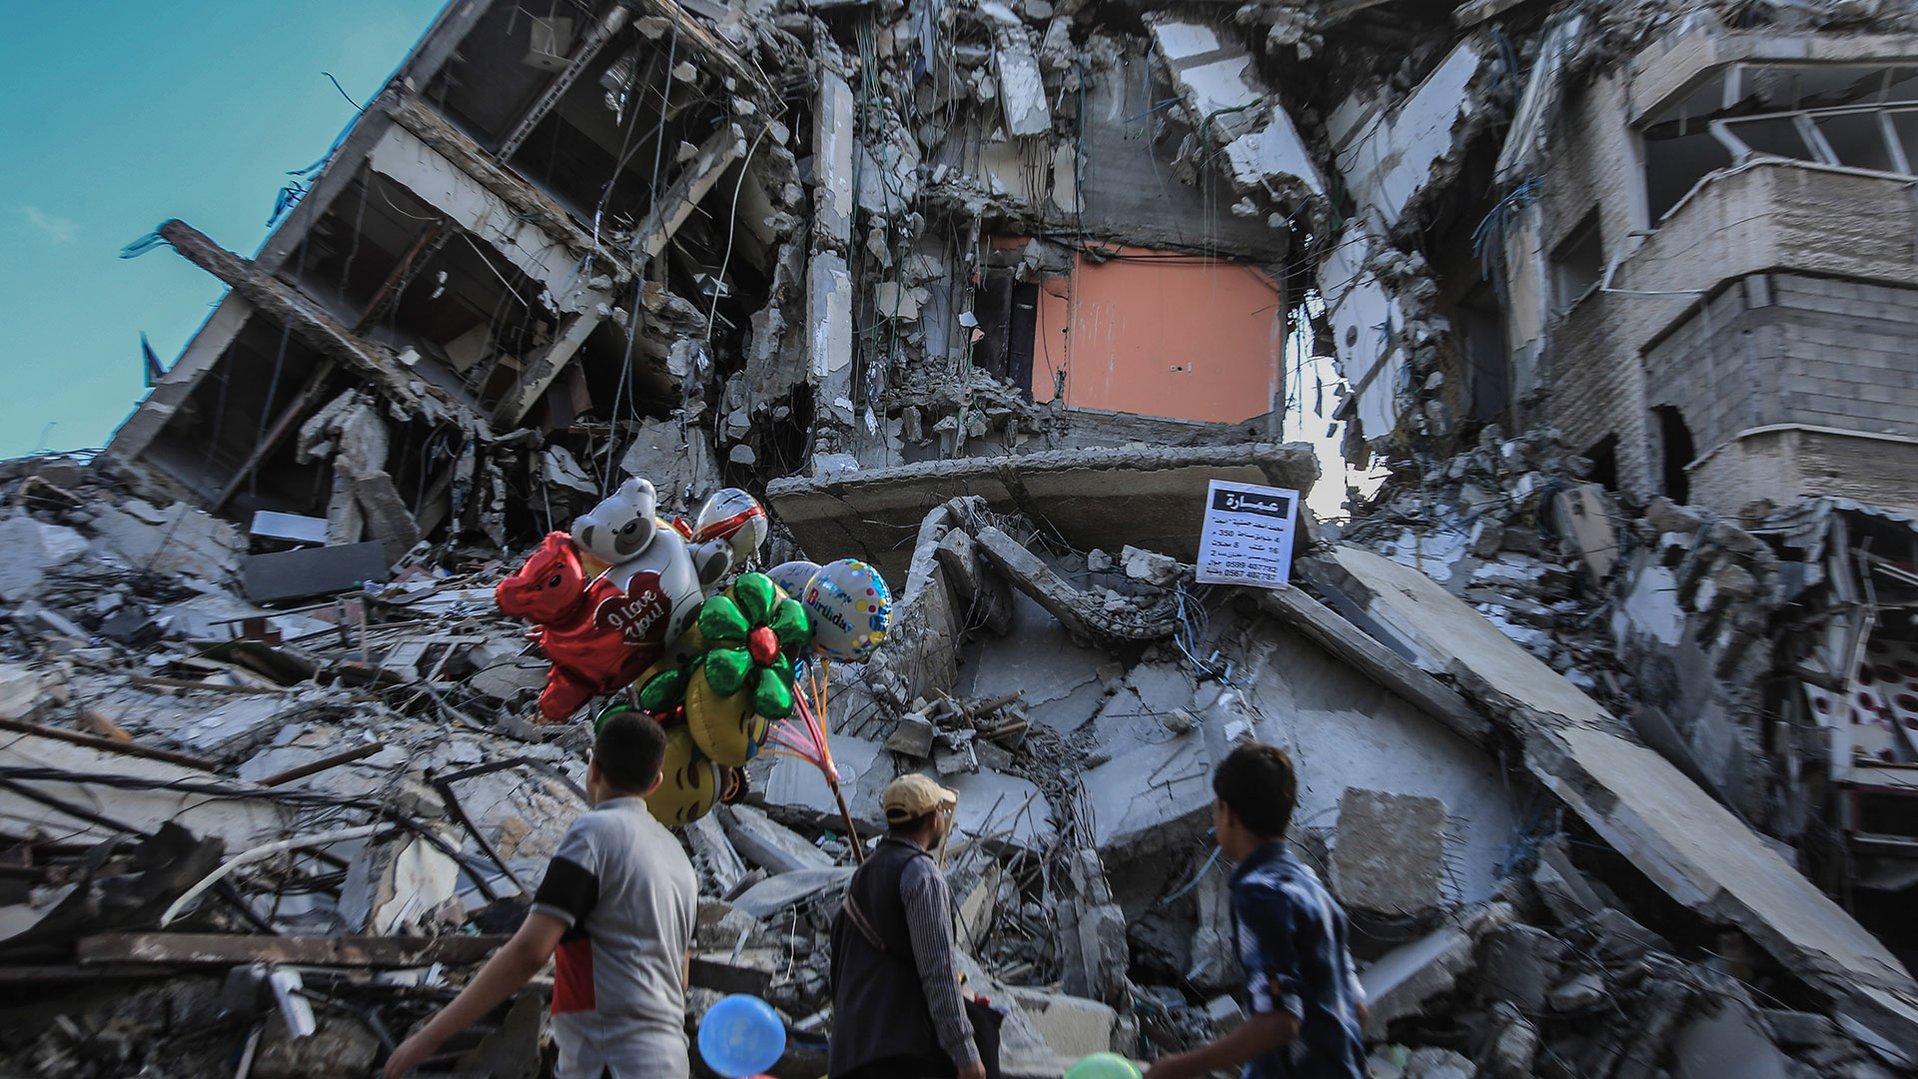 Destruction in Gaza after airstrikes in May 2021